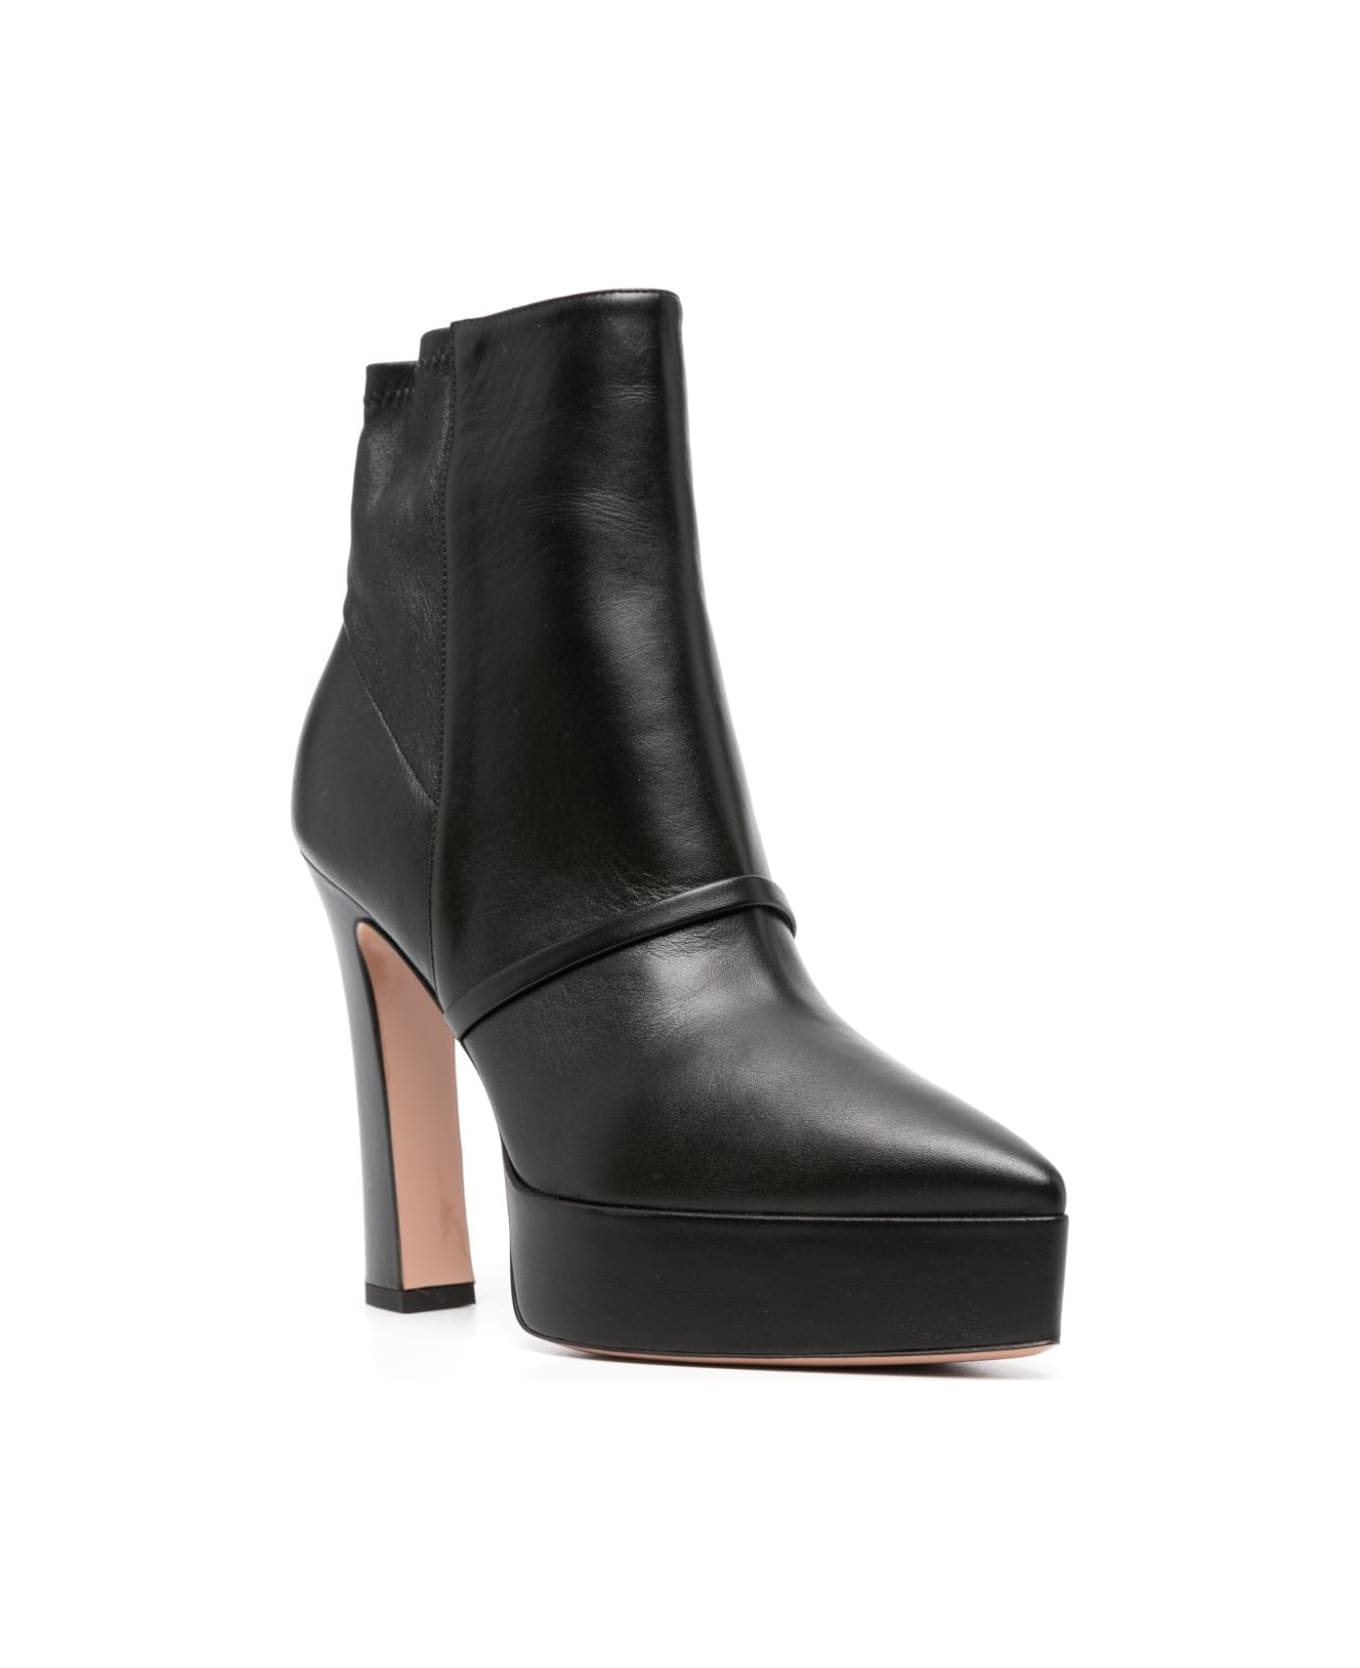 Malone Souliers Rue 125 High Heel Ankle Boots - Black  Black ブーツ